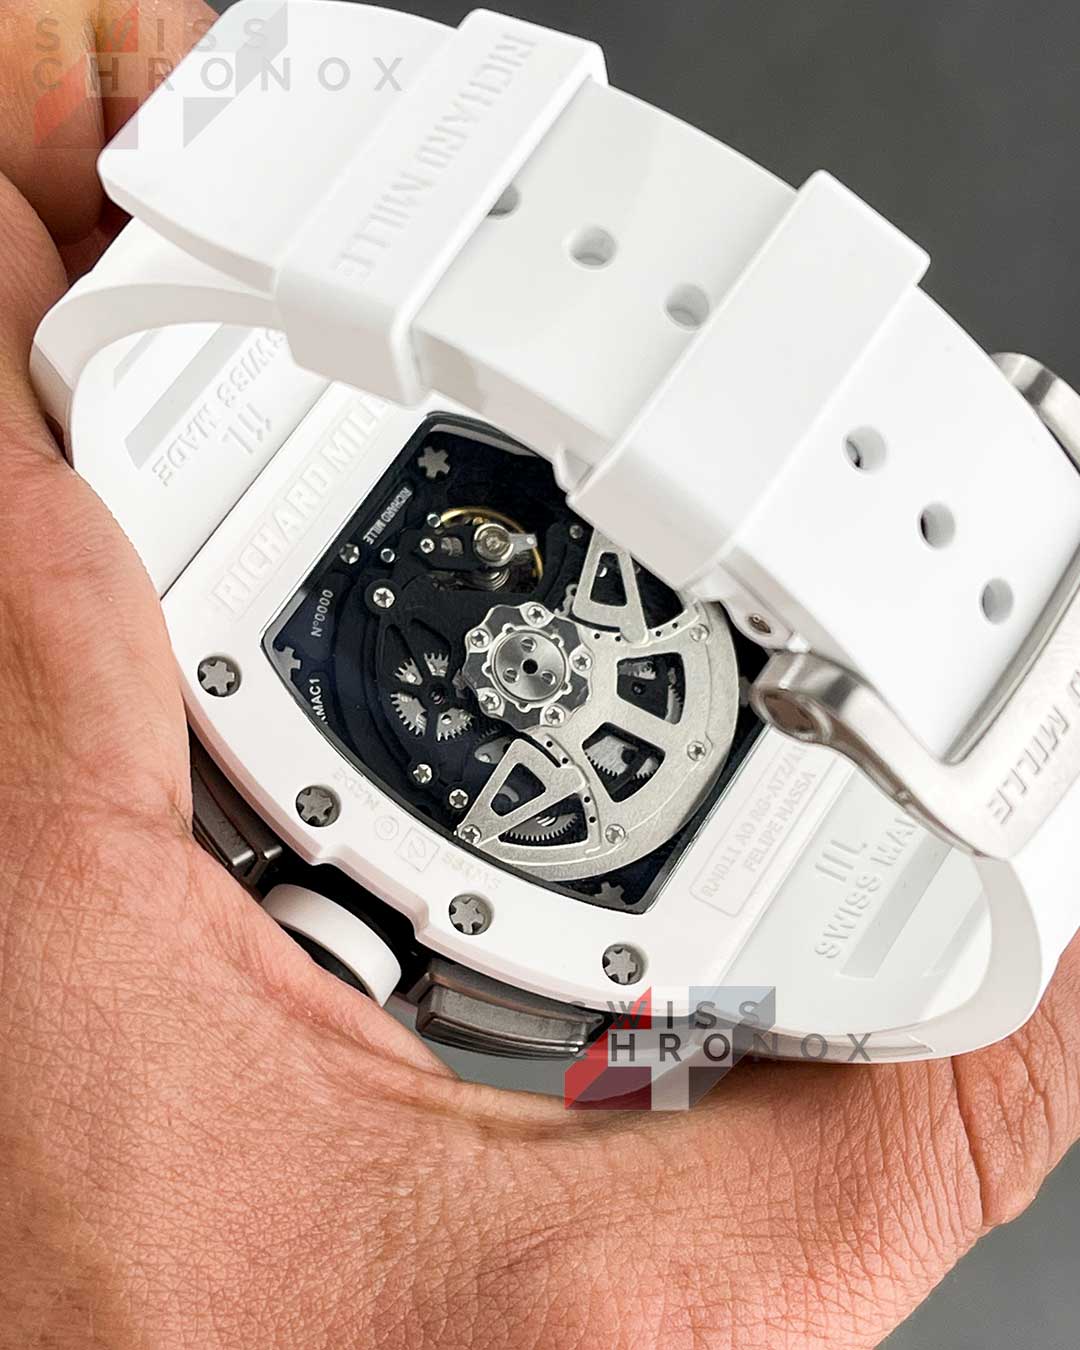 richard mille rm 011 ceramic ntpt asia limited edition 8